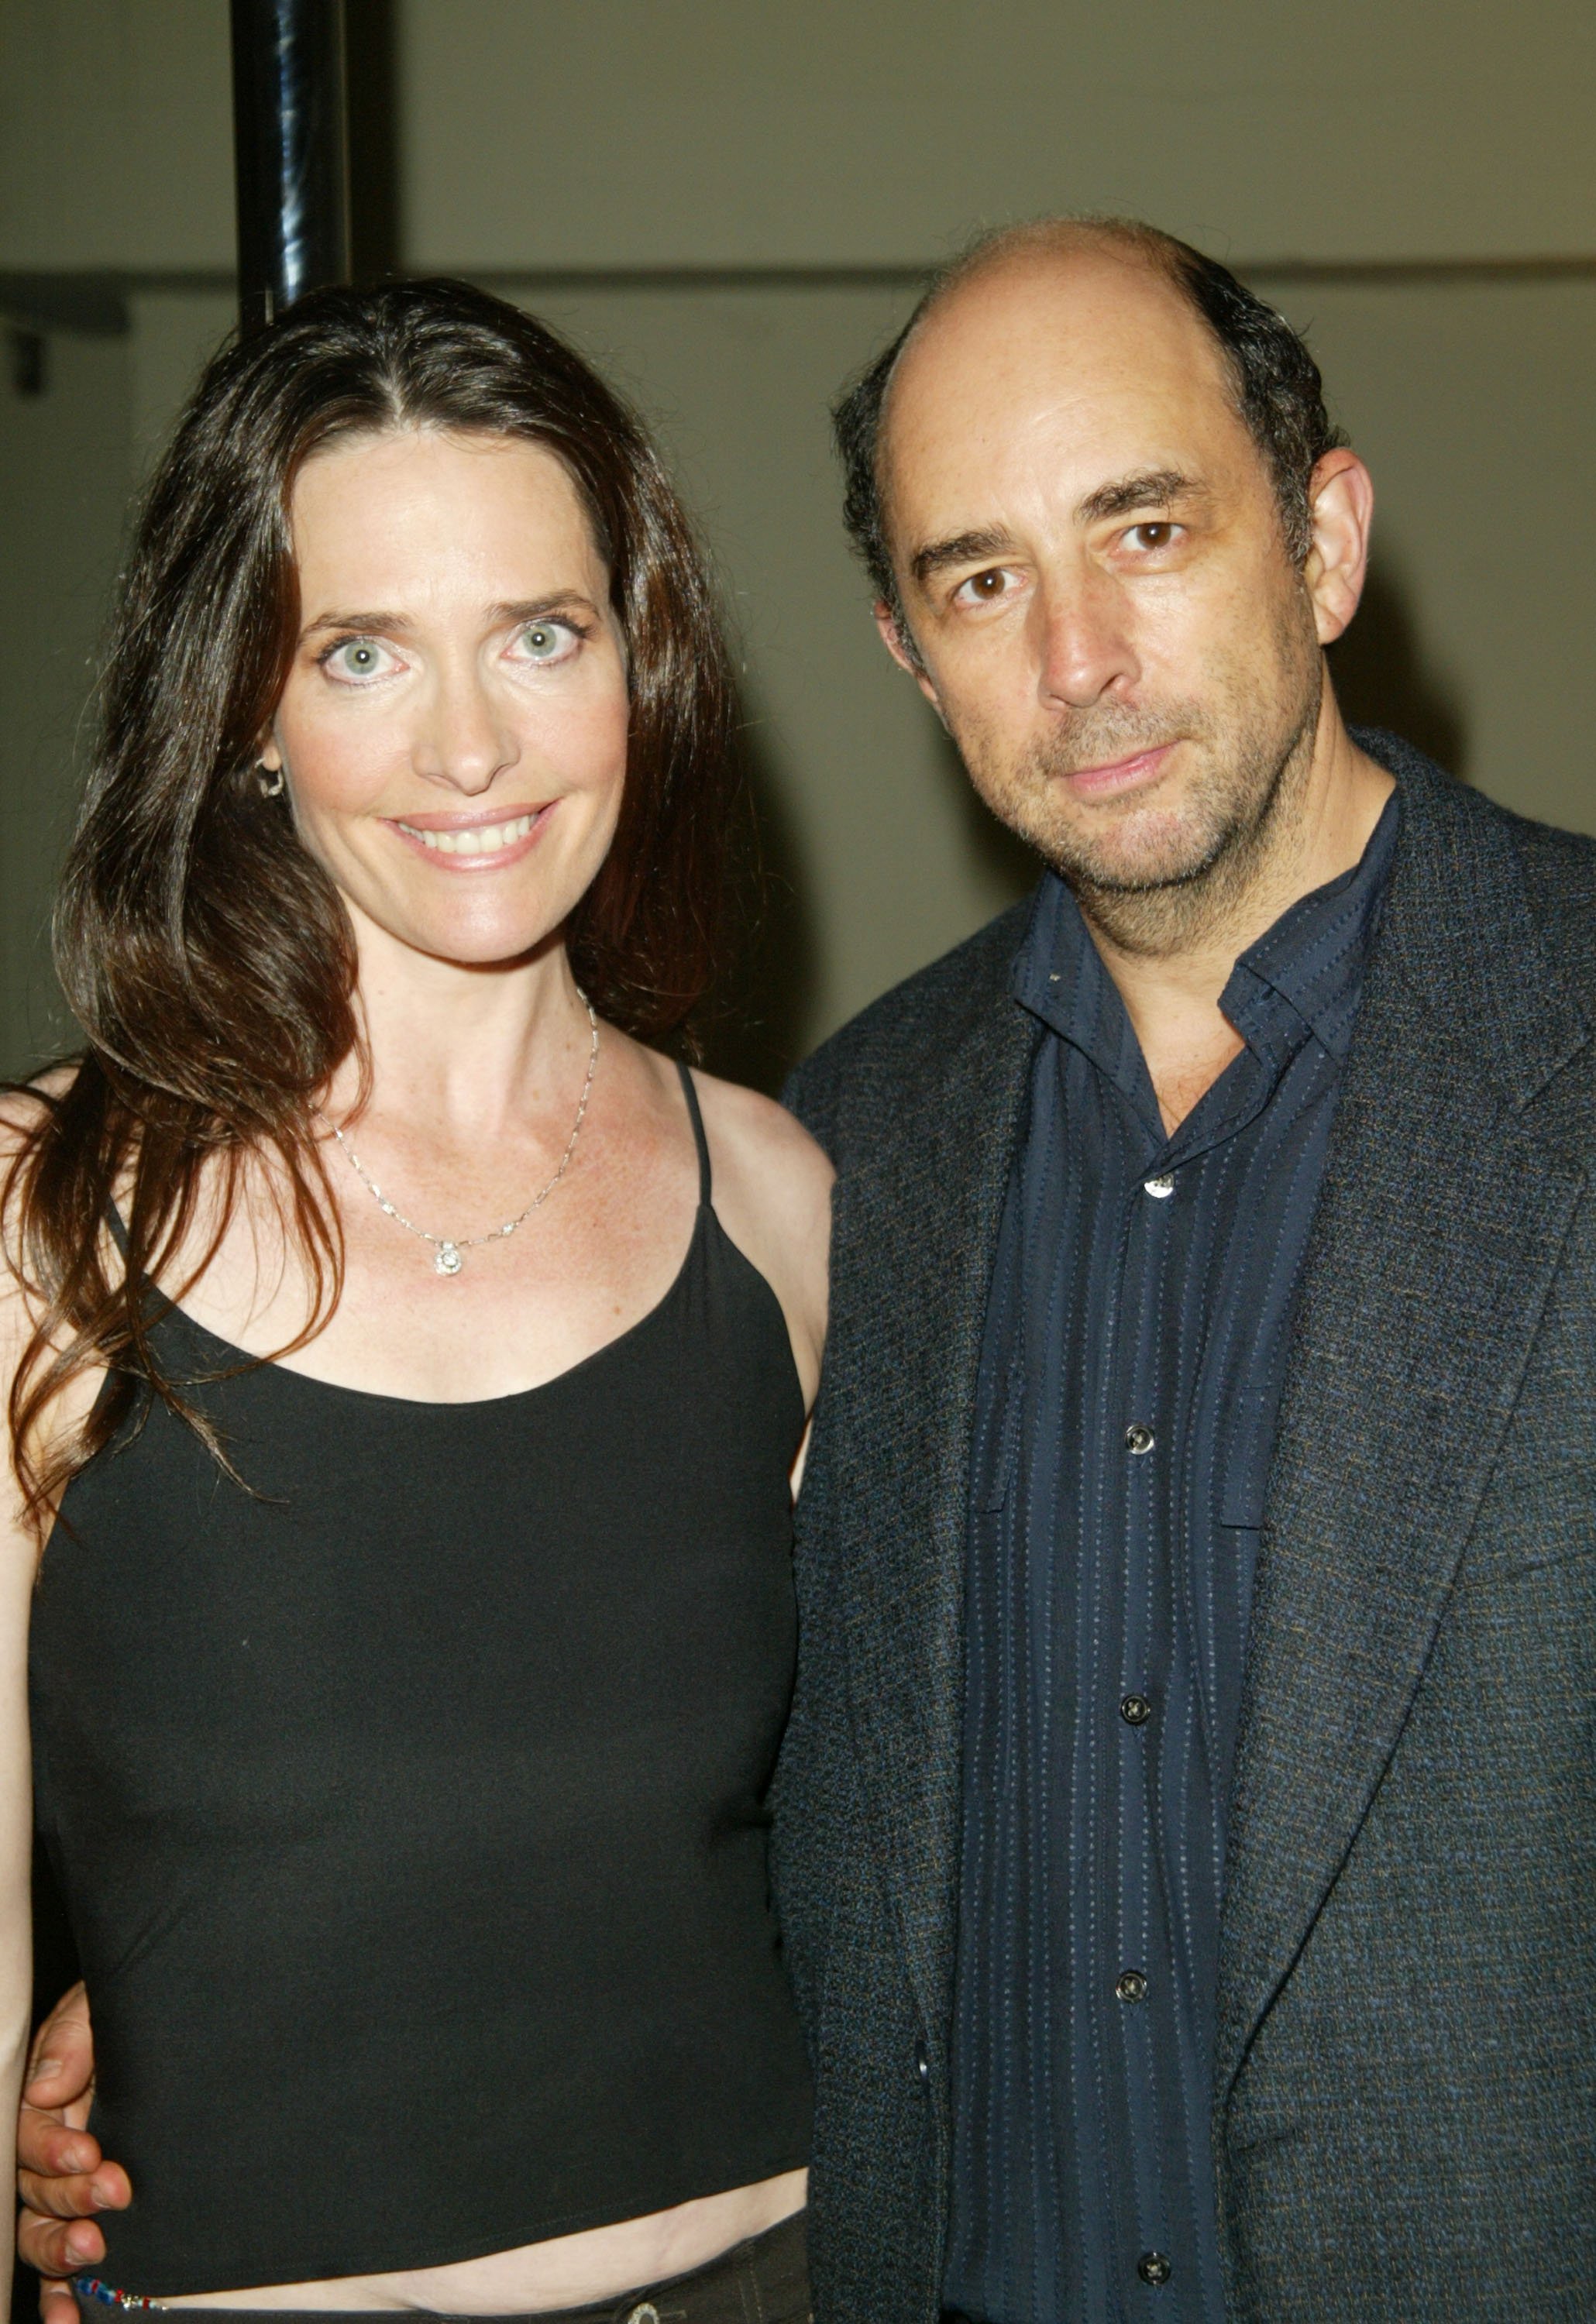 Sheila Kelley and Richard Schiff attend the opening party for Kelley's Factor Studio in Los Angeles, California on June 14, 2003 | Photo: Getty Images